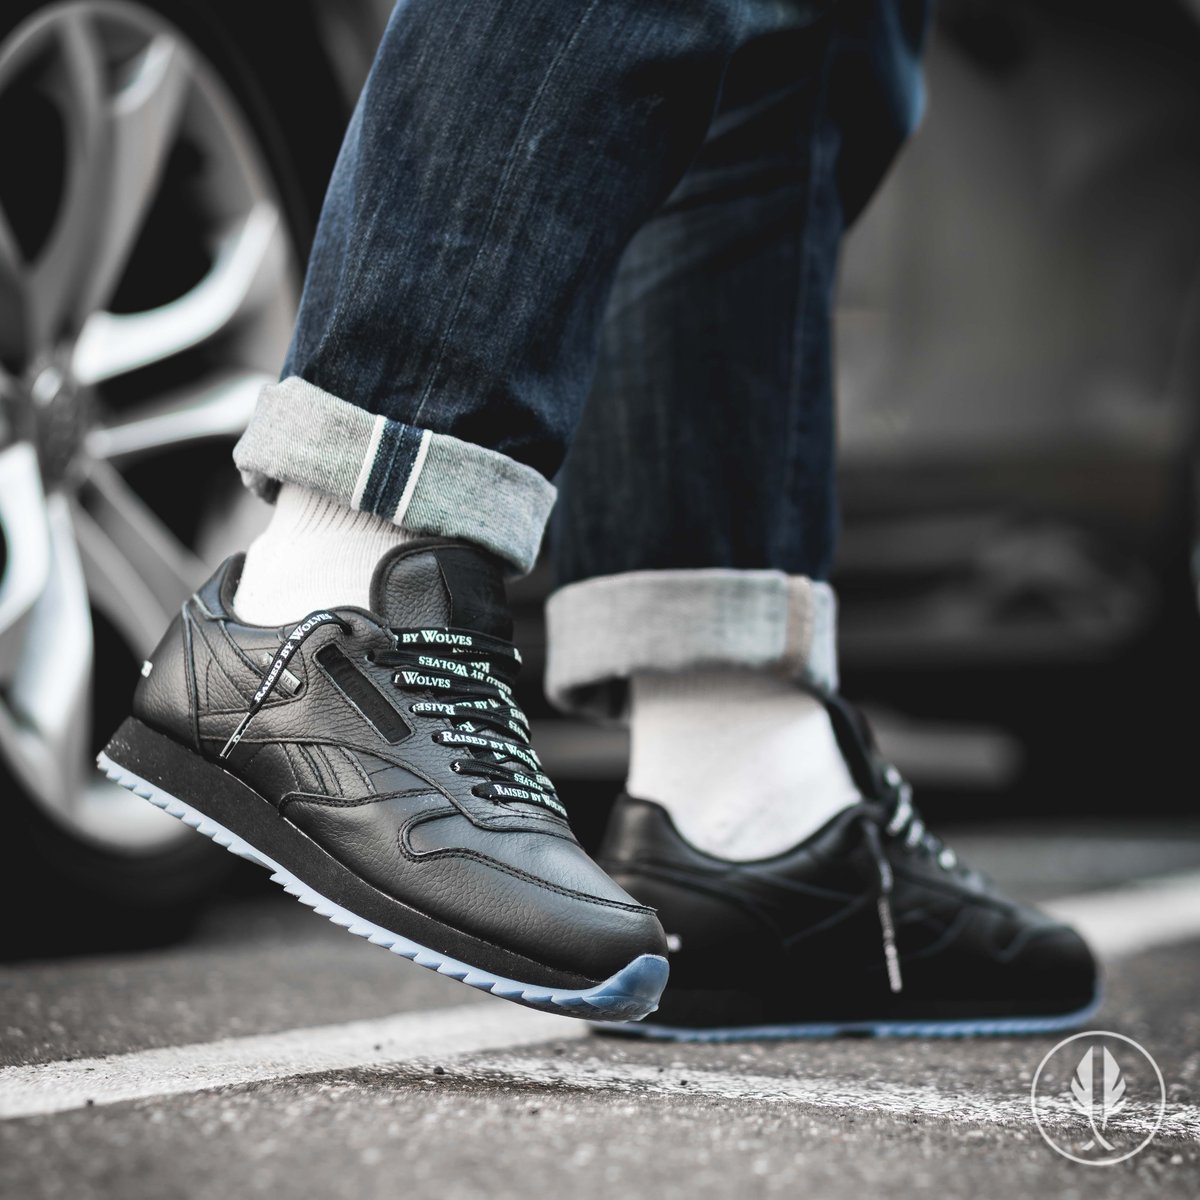 reebok classic leather ripple gtx x raised by wolves